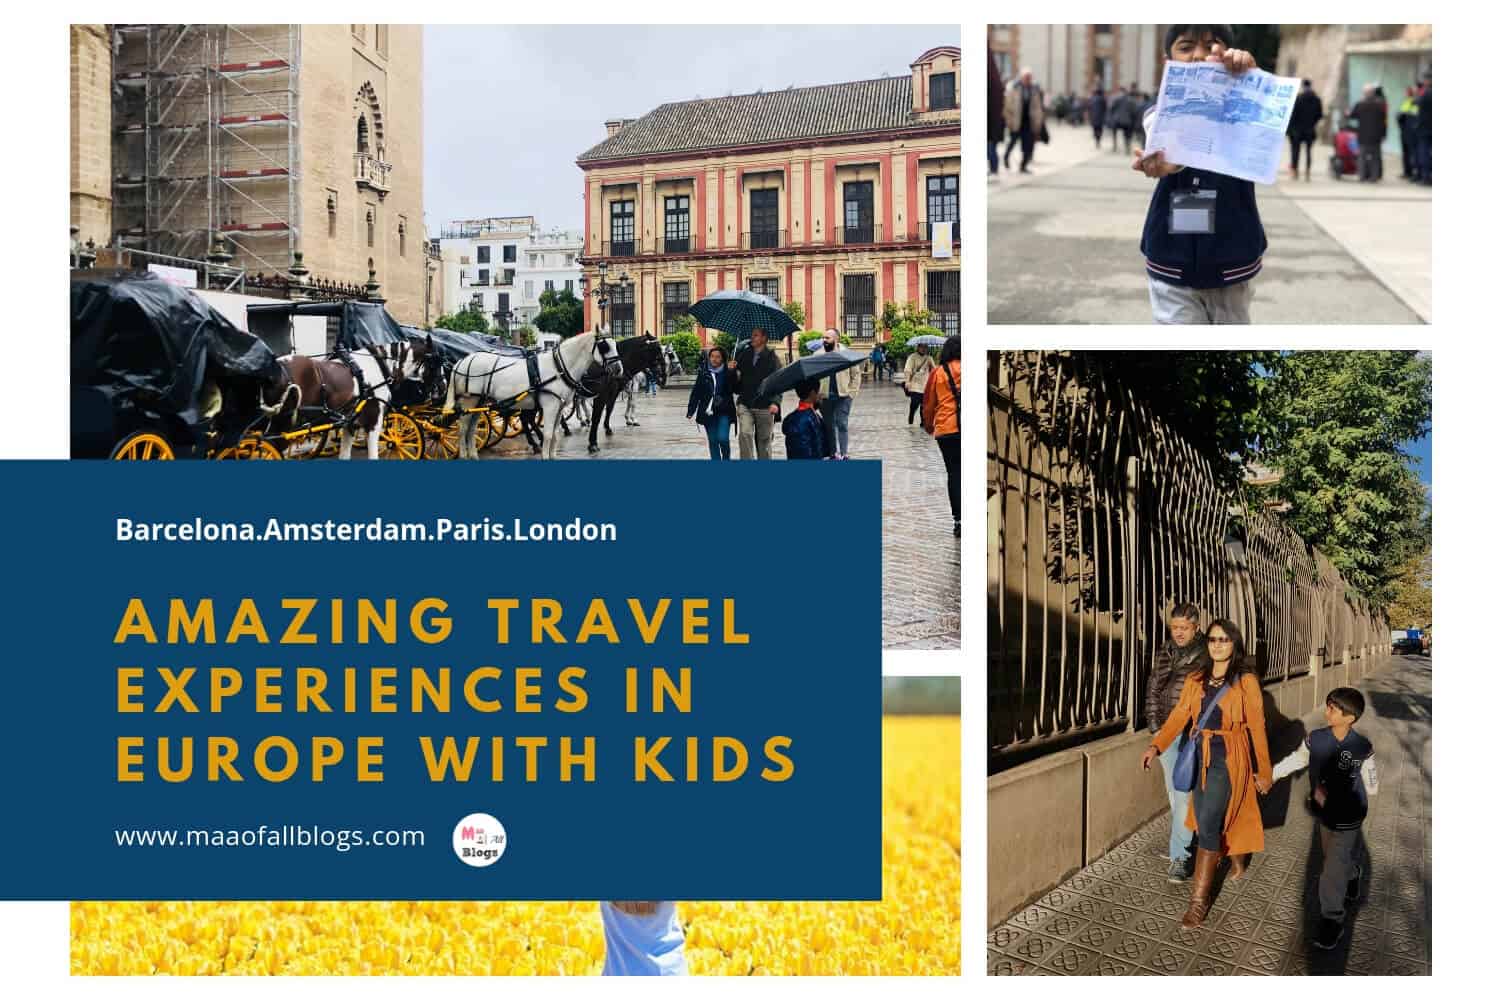 Europe with kids